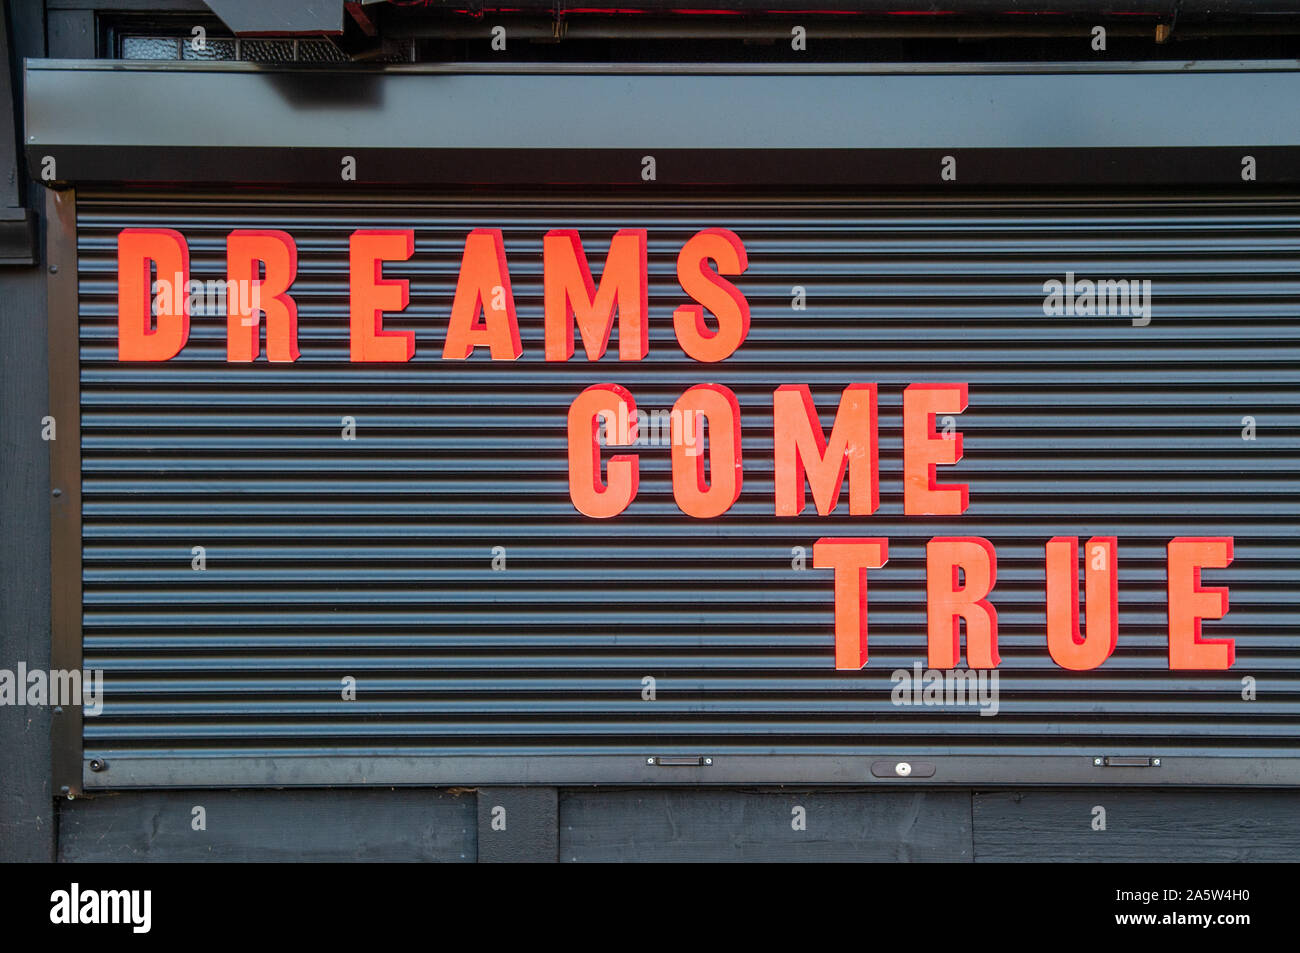 Dreams Come True motivational statement written in bright red / ornage capital letters on a black background. Stock Photo